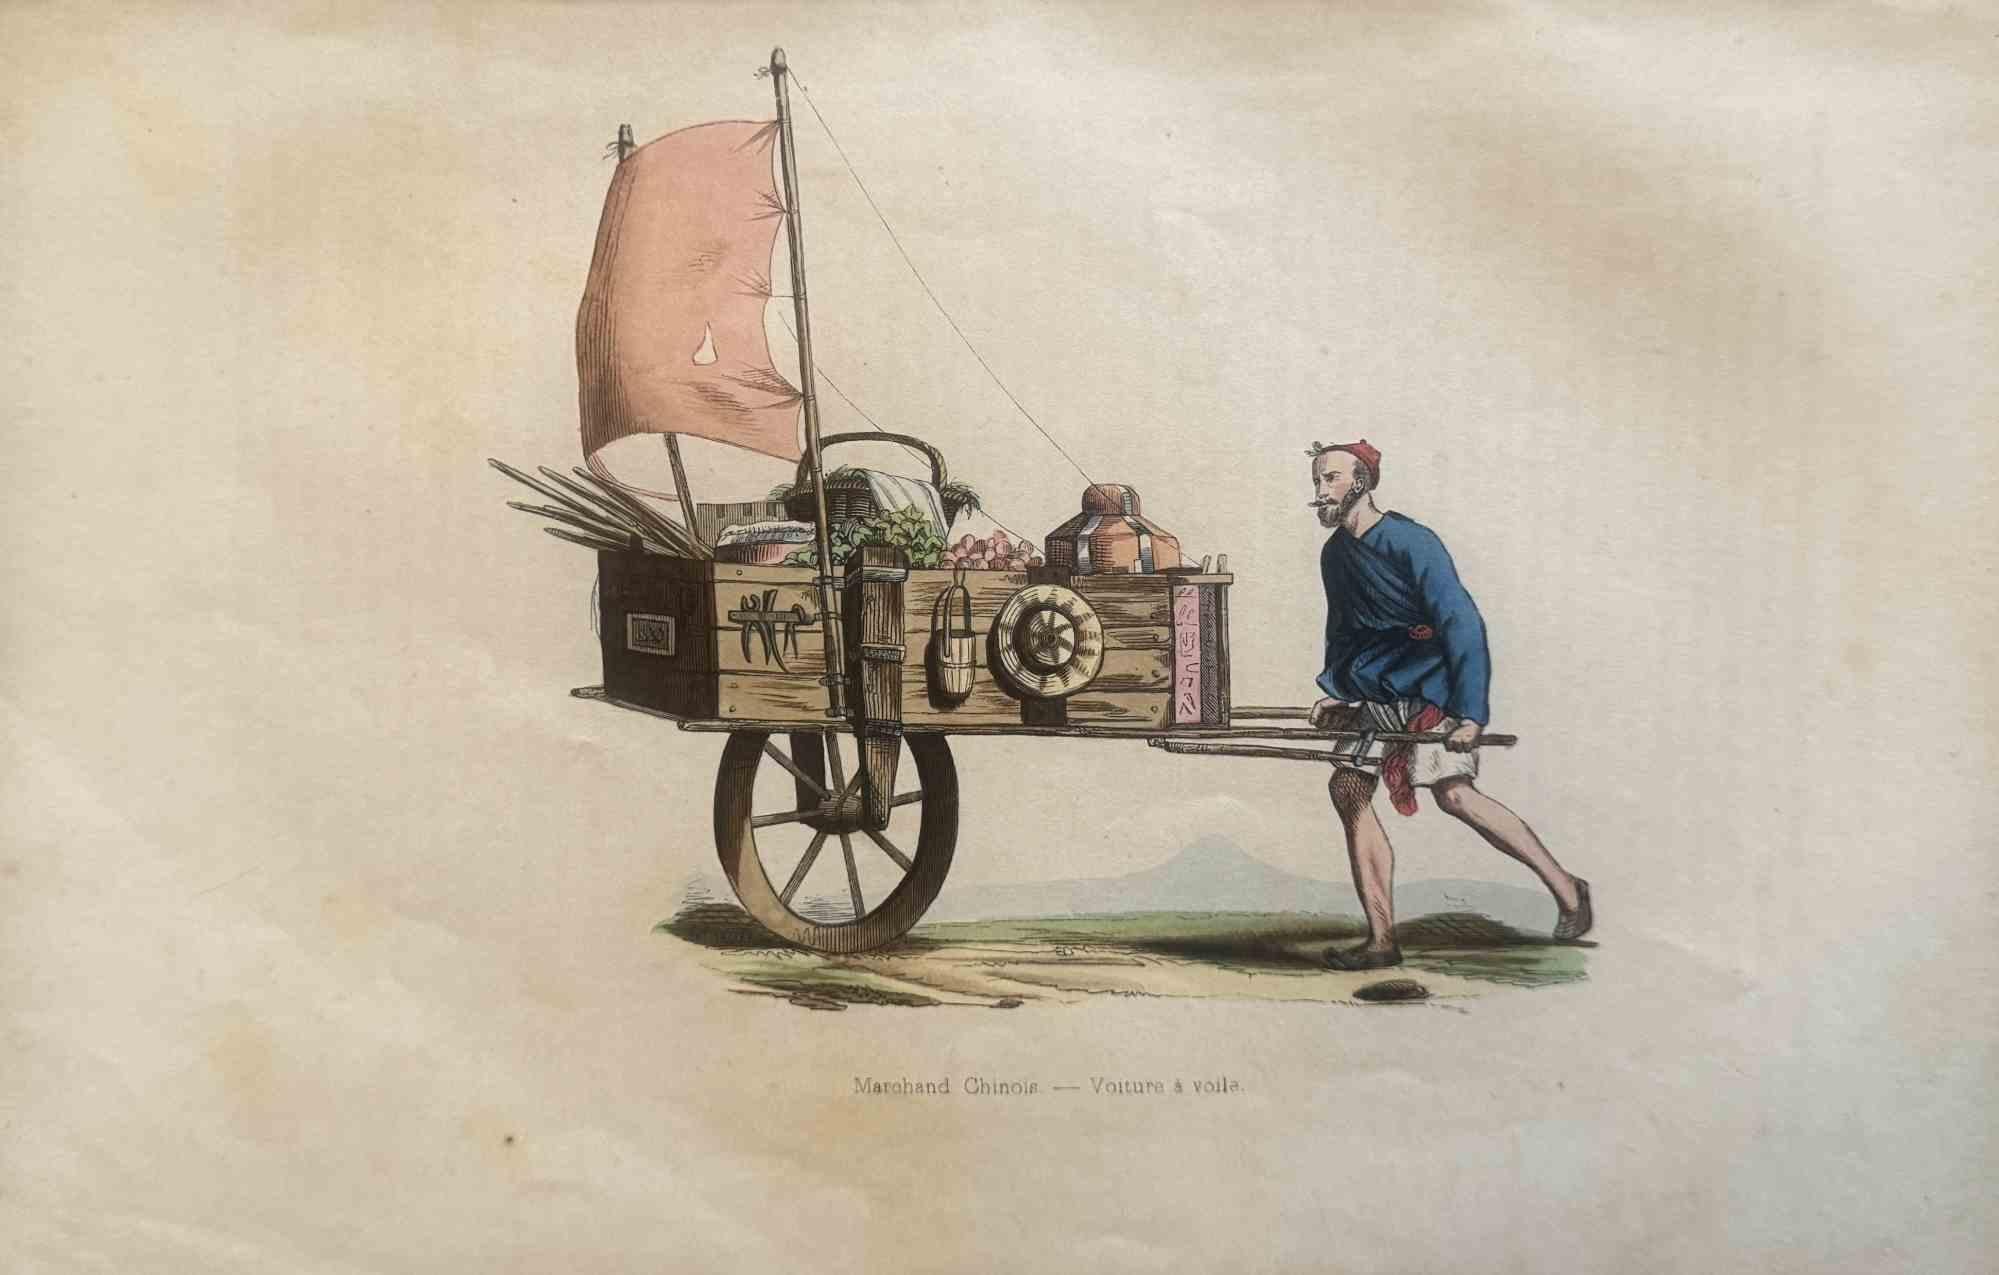 Various Artists Figurative Print - Uses and Customs - Chinese Merchant - Lithograph - 1862